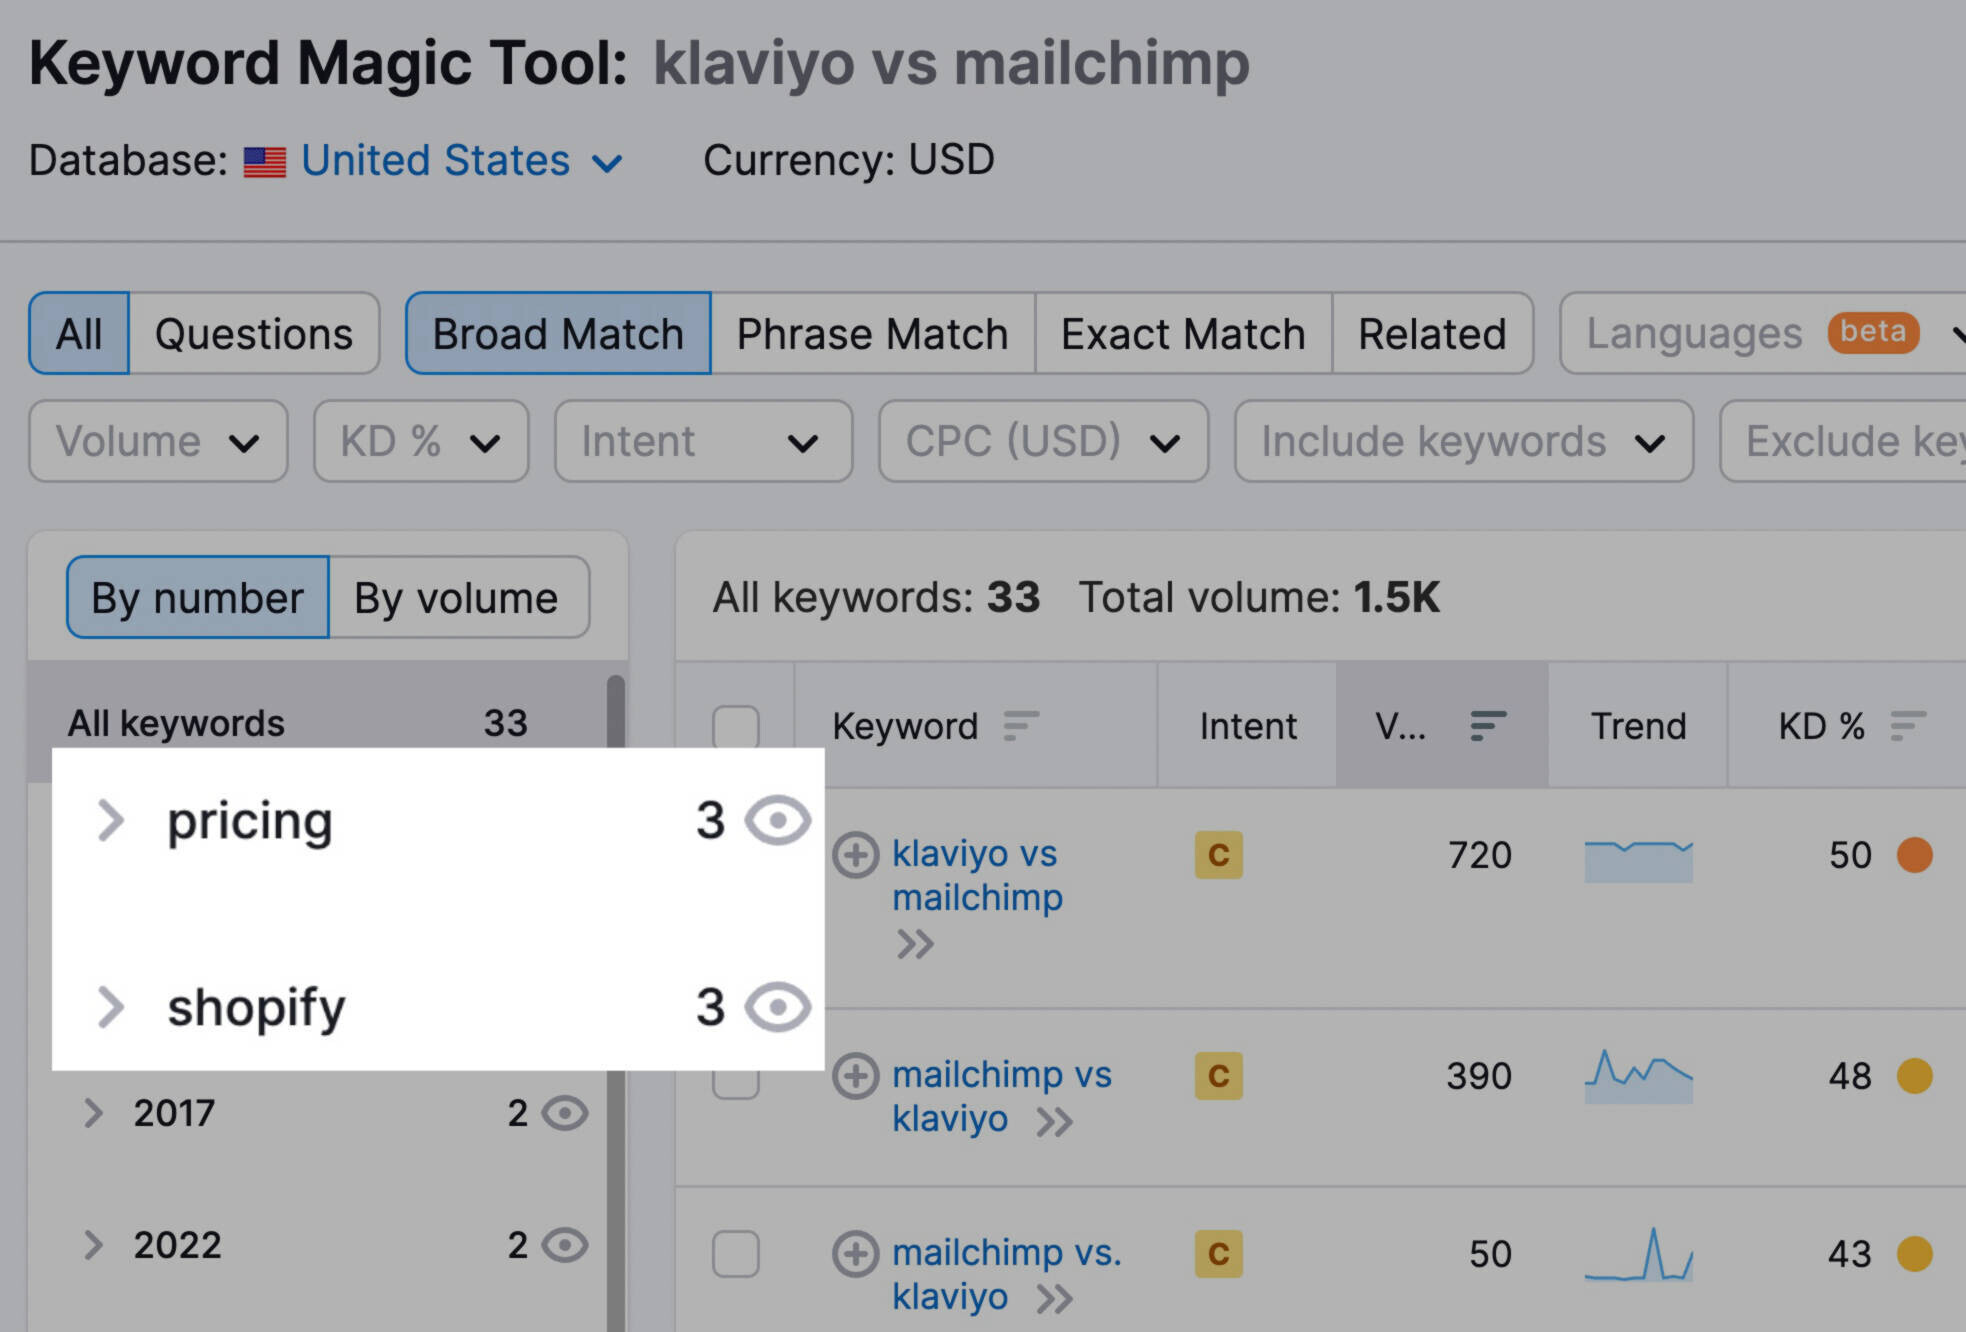 Keyword Magic Tool results for "Klaviyo vs mailchimp" with "pricing" and "Shopify" highlighted